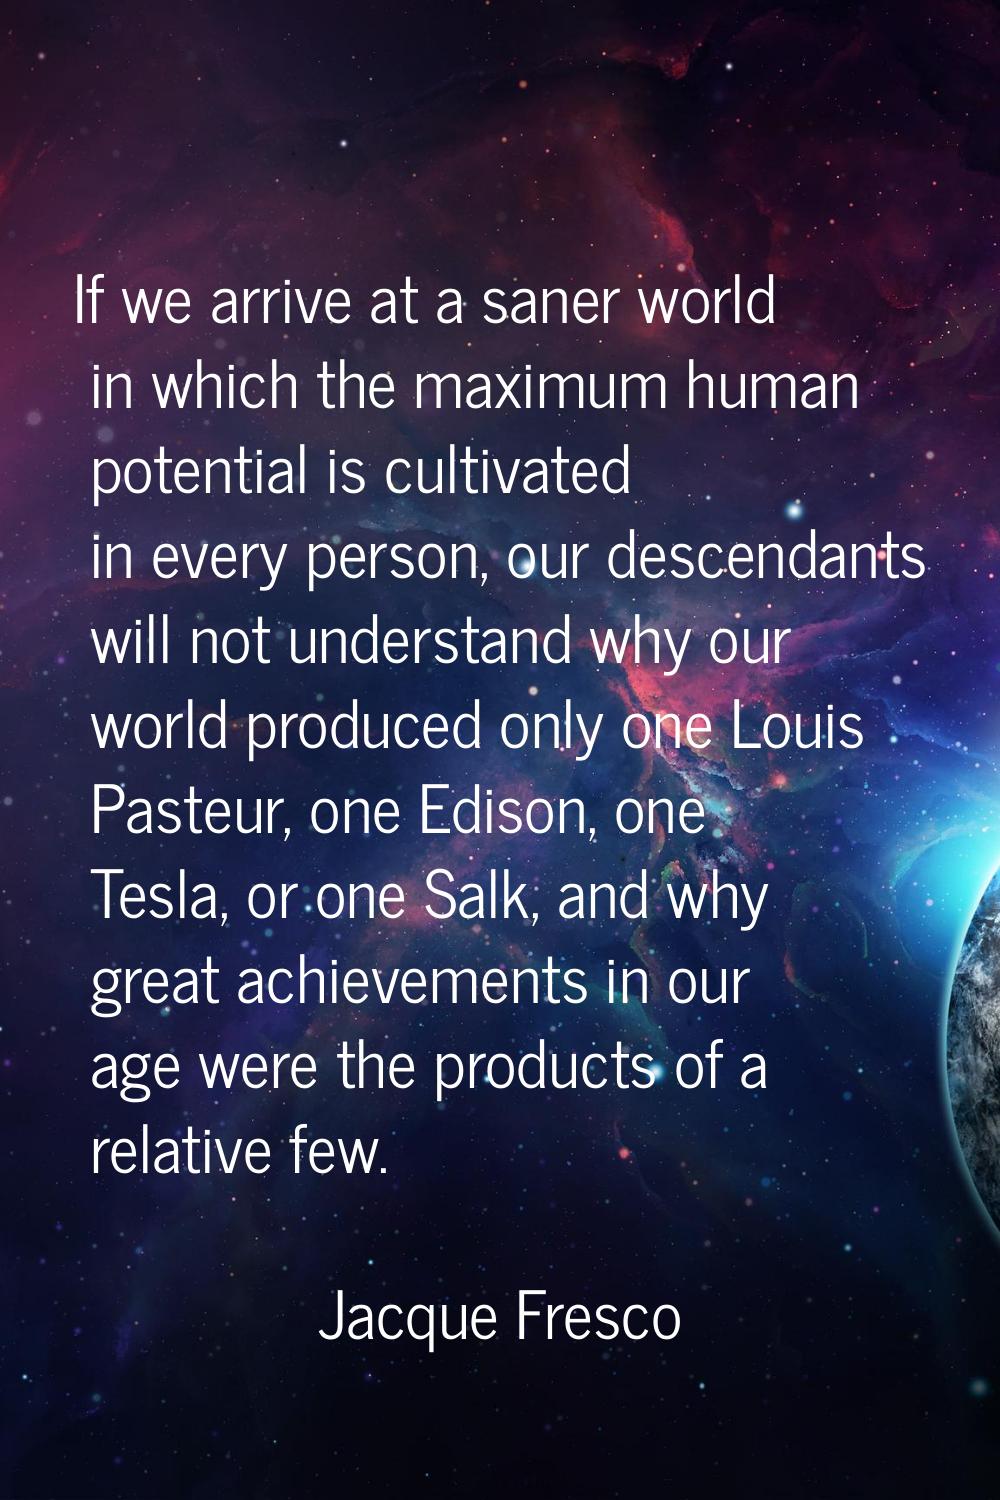 If we arrive at a saner world in which the maximum human potential is cultivated in every person, o